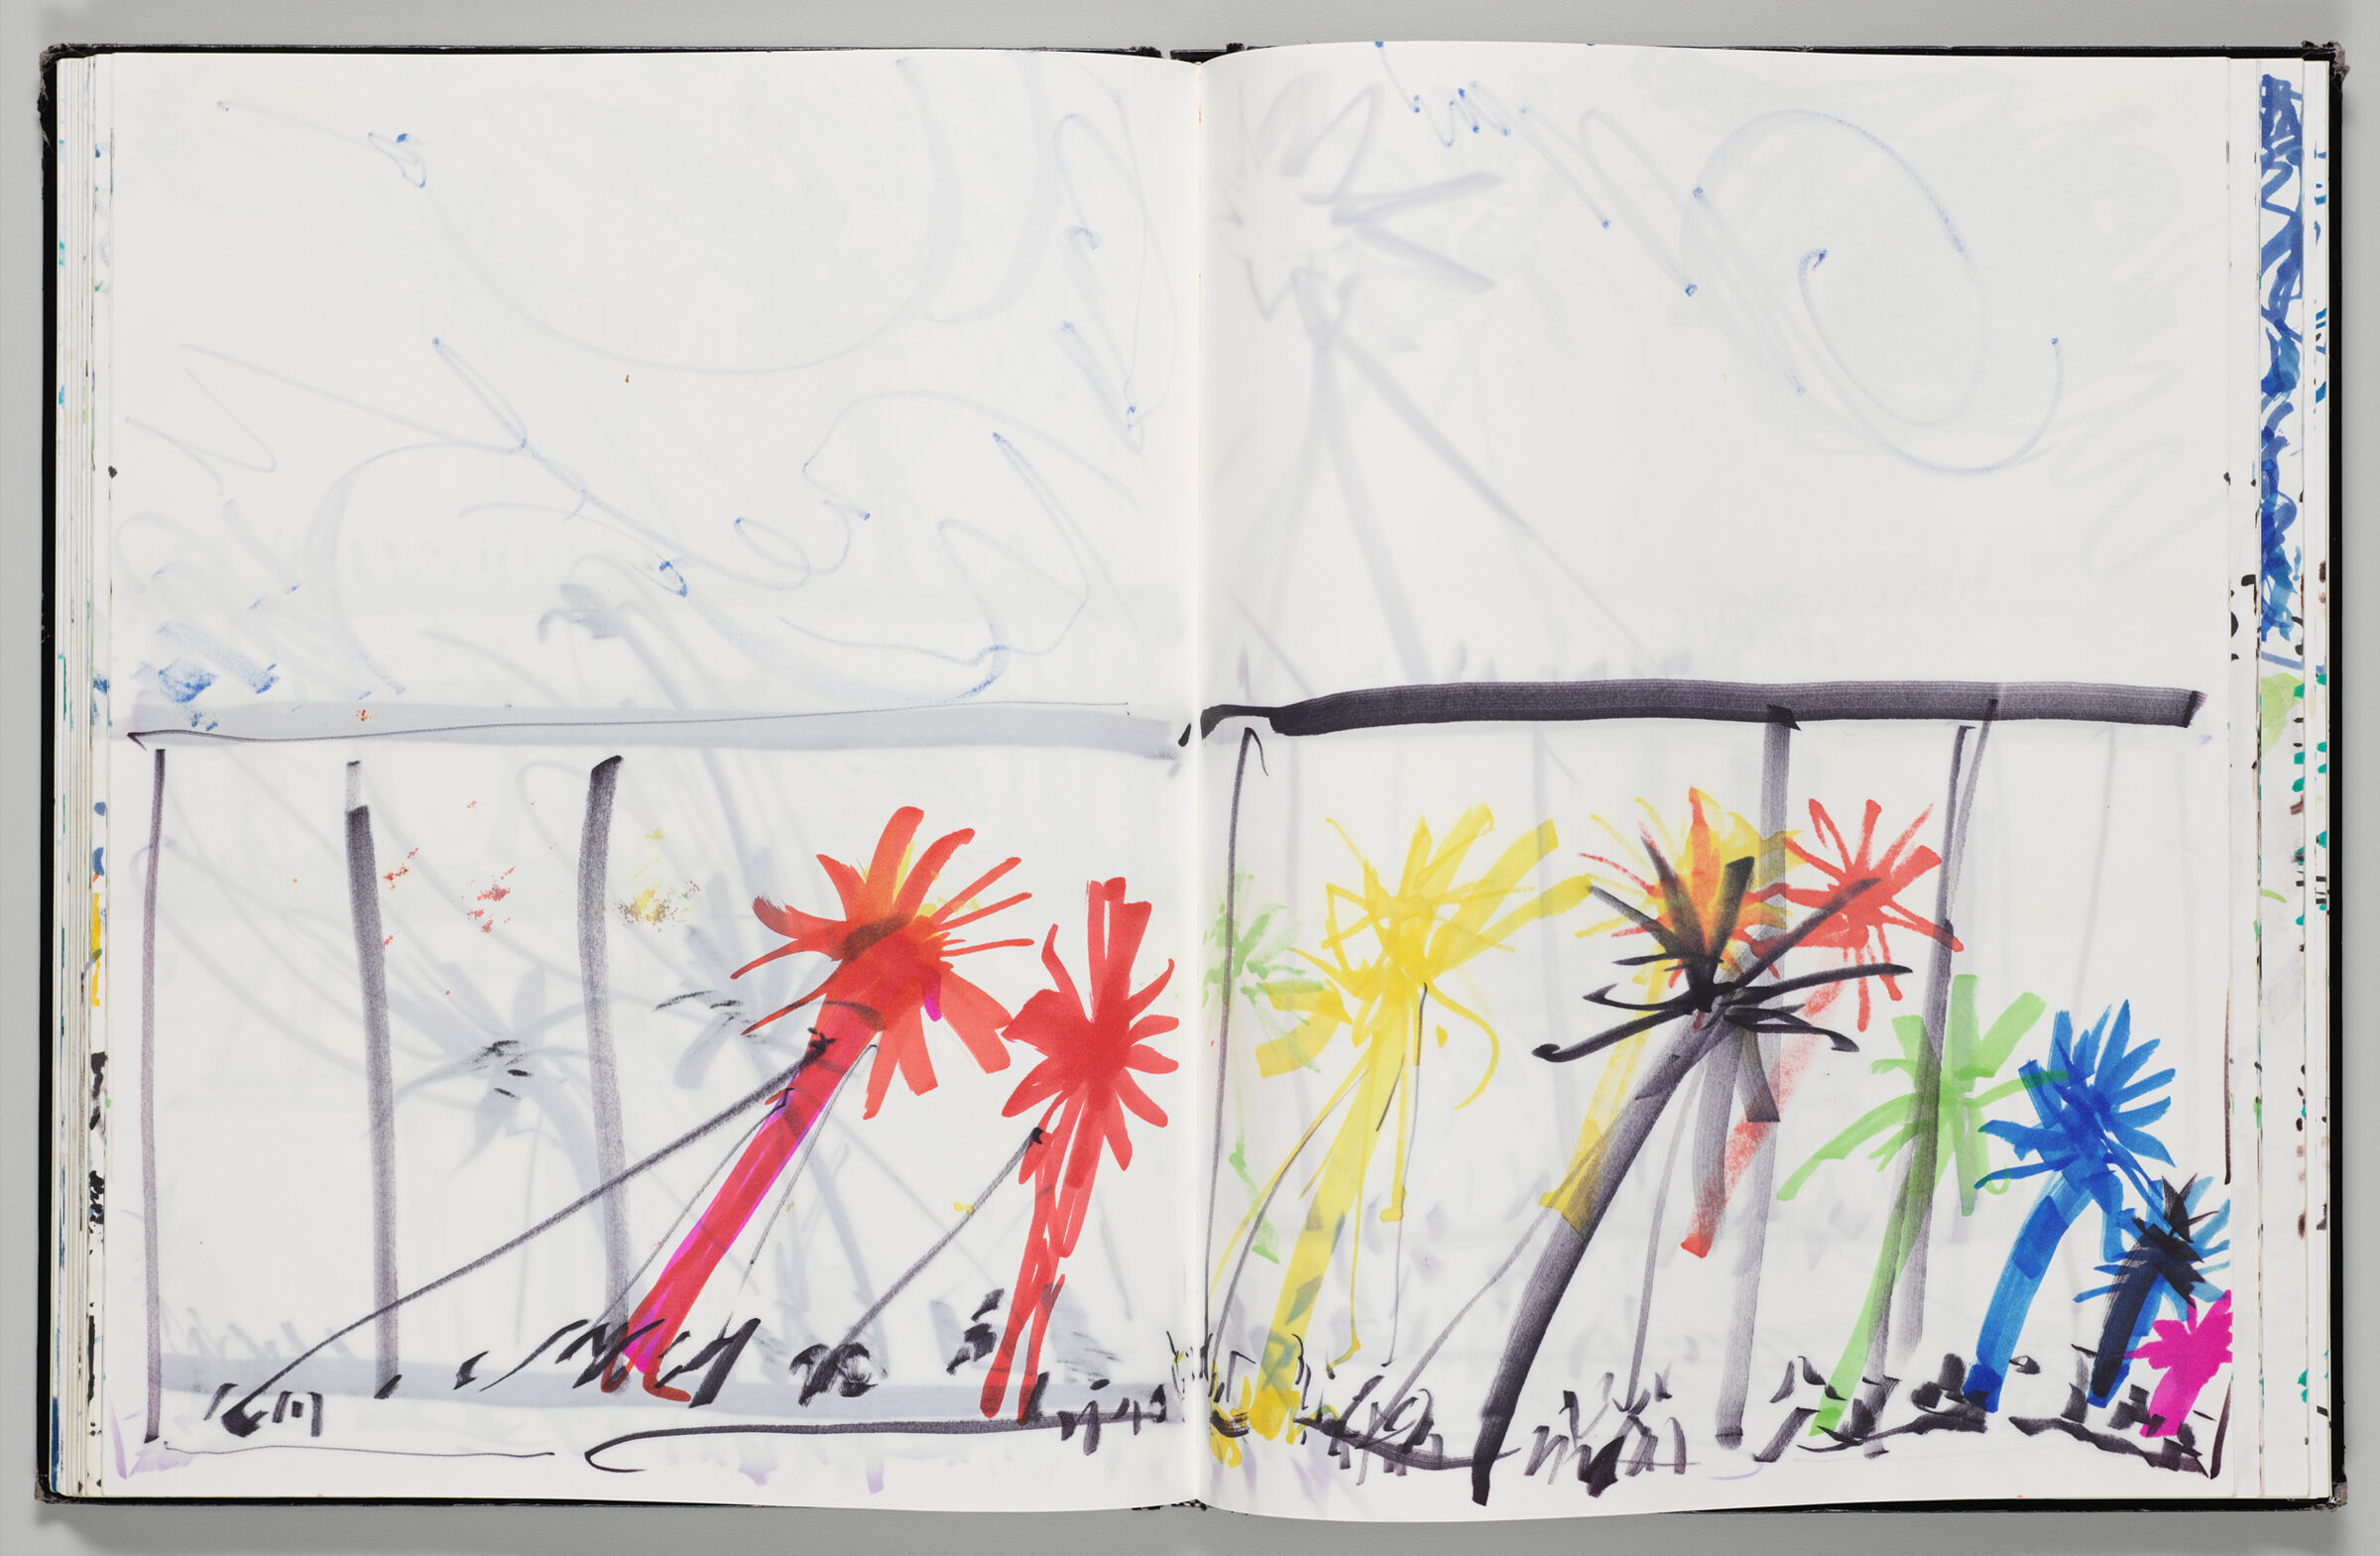 Untitled (Design For Neue Nationalgalerie Inflatables Over Bleed-Through And Color Transfer, Two-Page Spread)